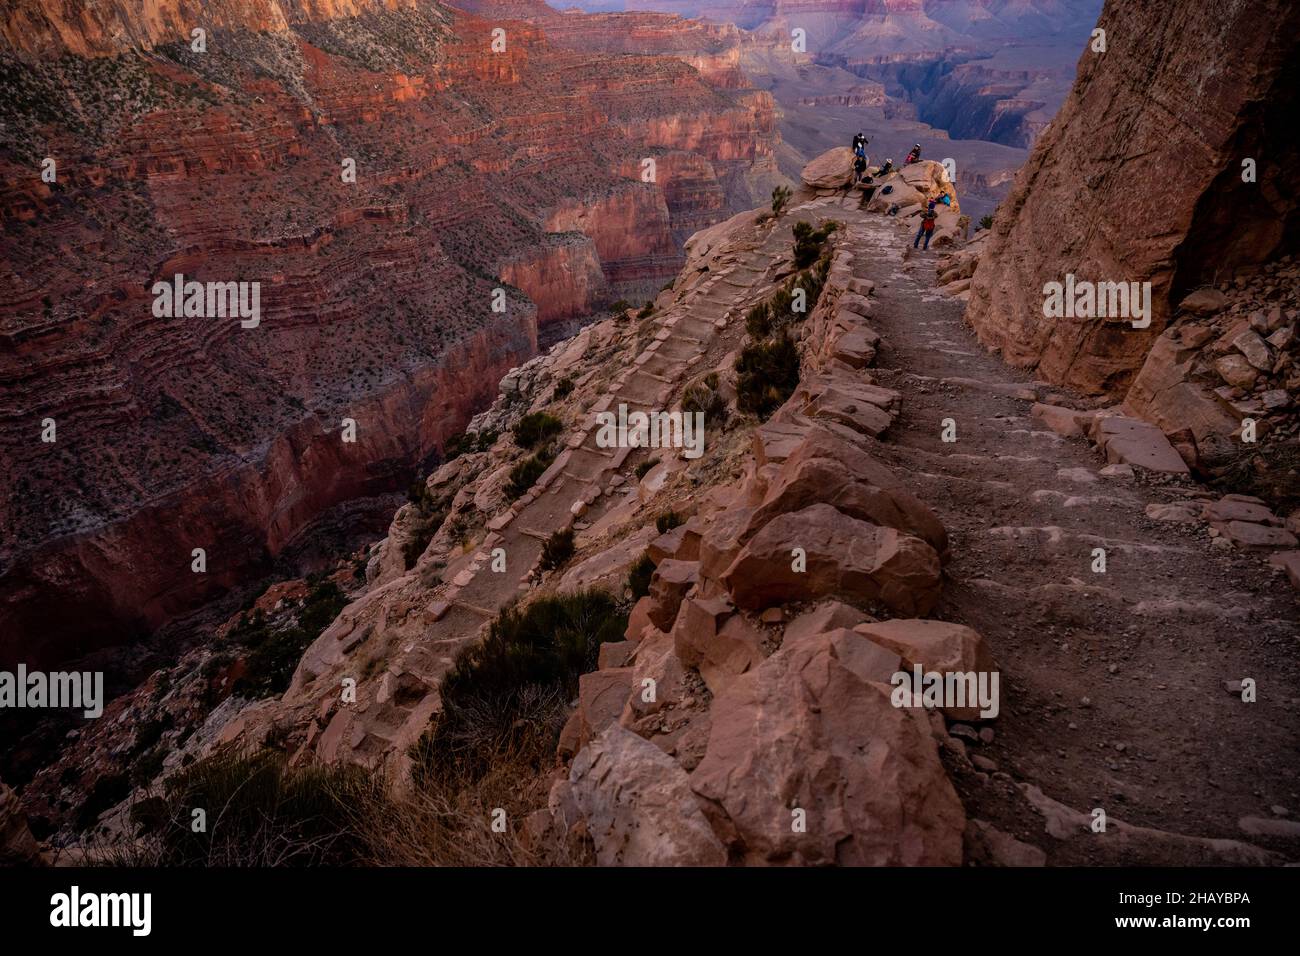 Hikers Gather For Sunrise At Ooh Ahh Point Along The Kaibab Trail in the Grand Canyon Stock Photo